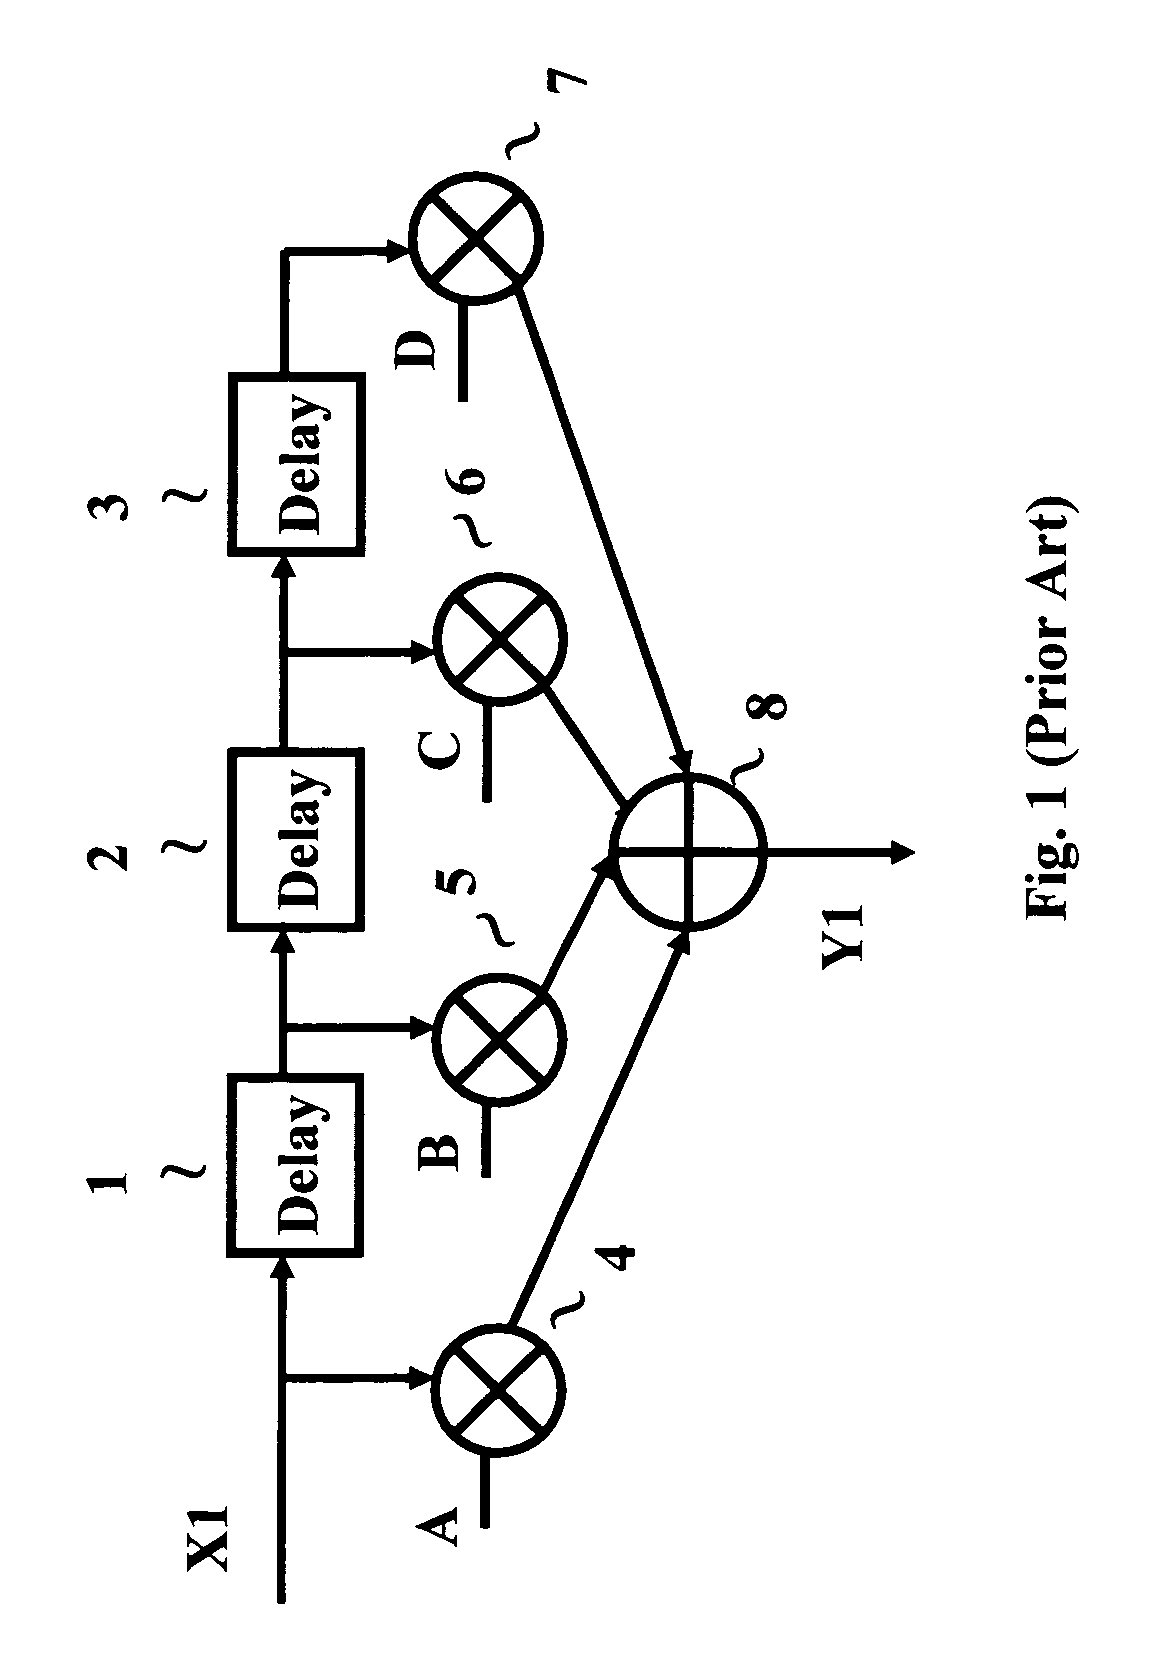 Continuous-time multi-gigahertz filter using transmission line delay elements